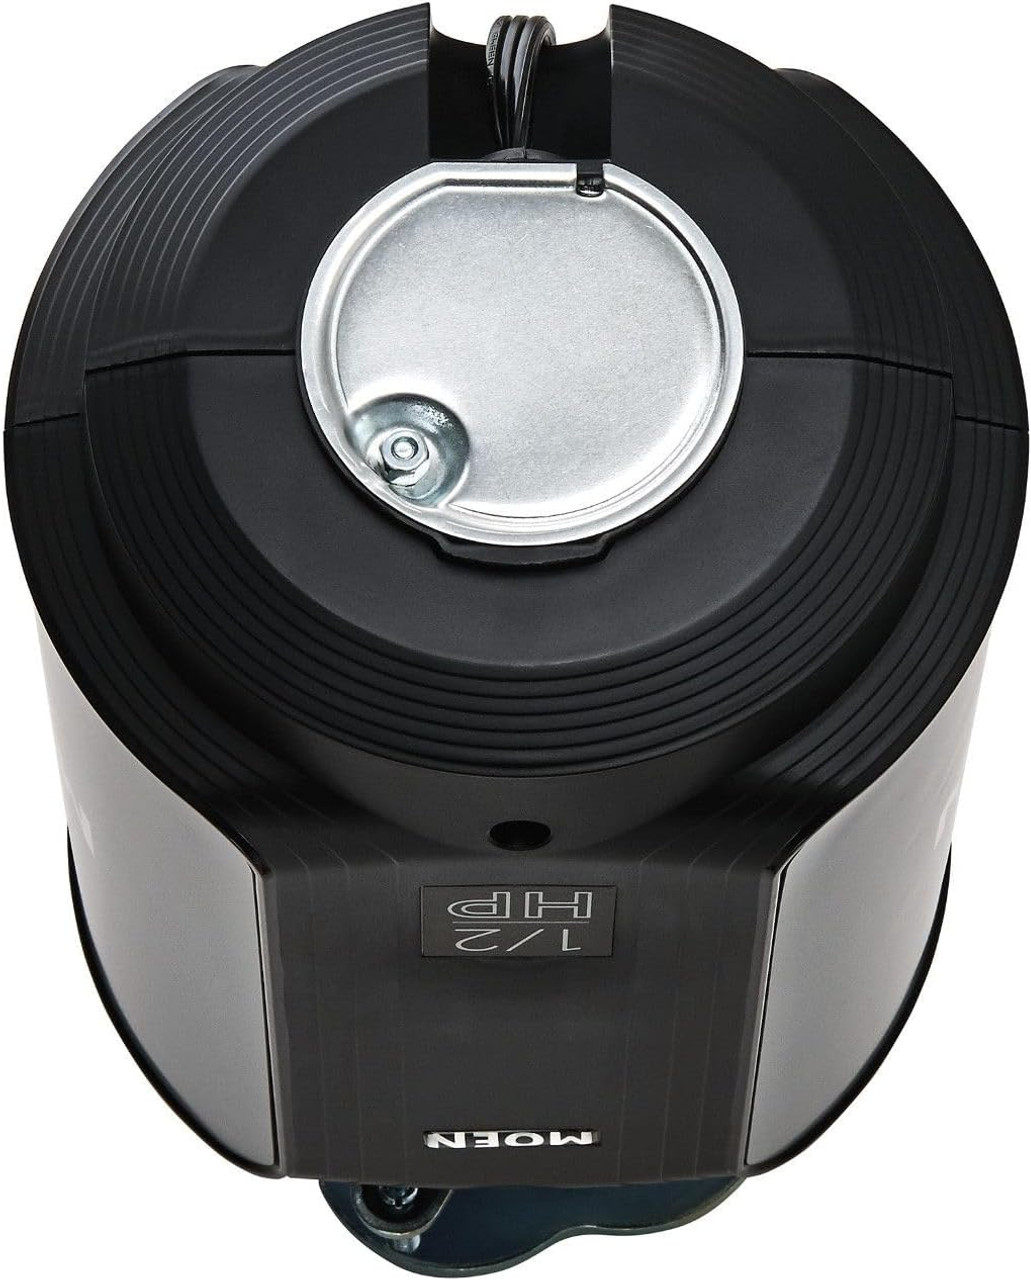 Moen GX50C Disposer Prep Series 1/2 HP Continuous Feed Garbage Disposal with Sound Reduction